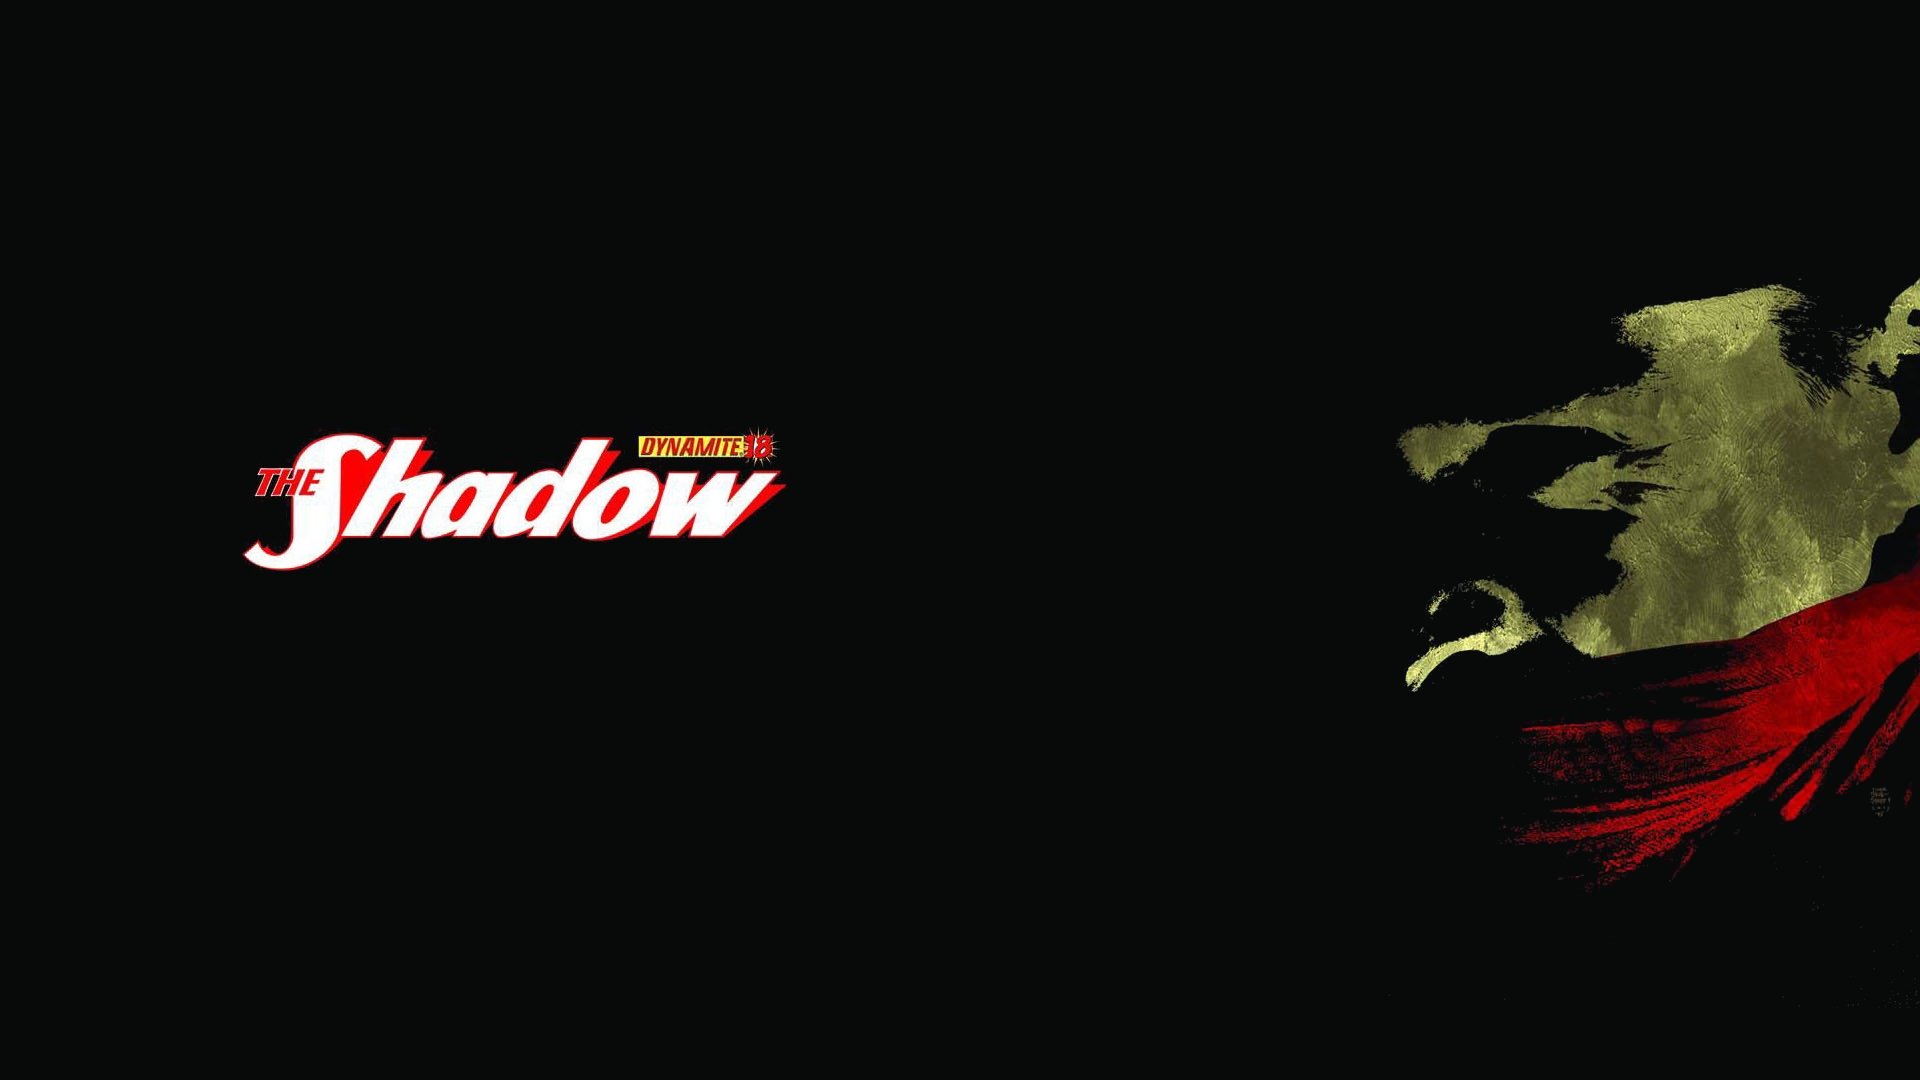 Download full hd 1920x1080 The Shadow desktop wallpaper ID:250609 for free